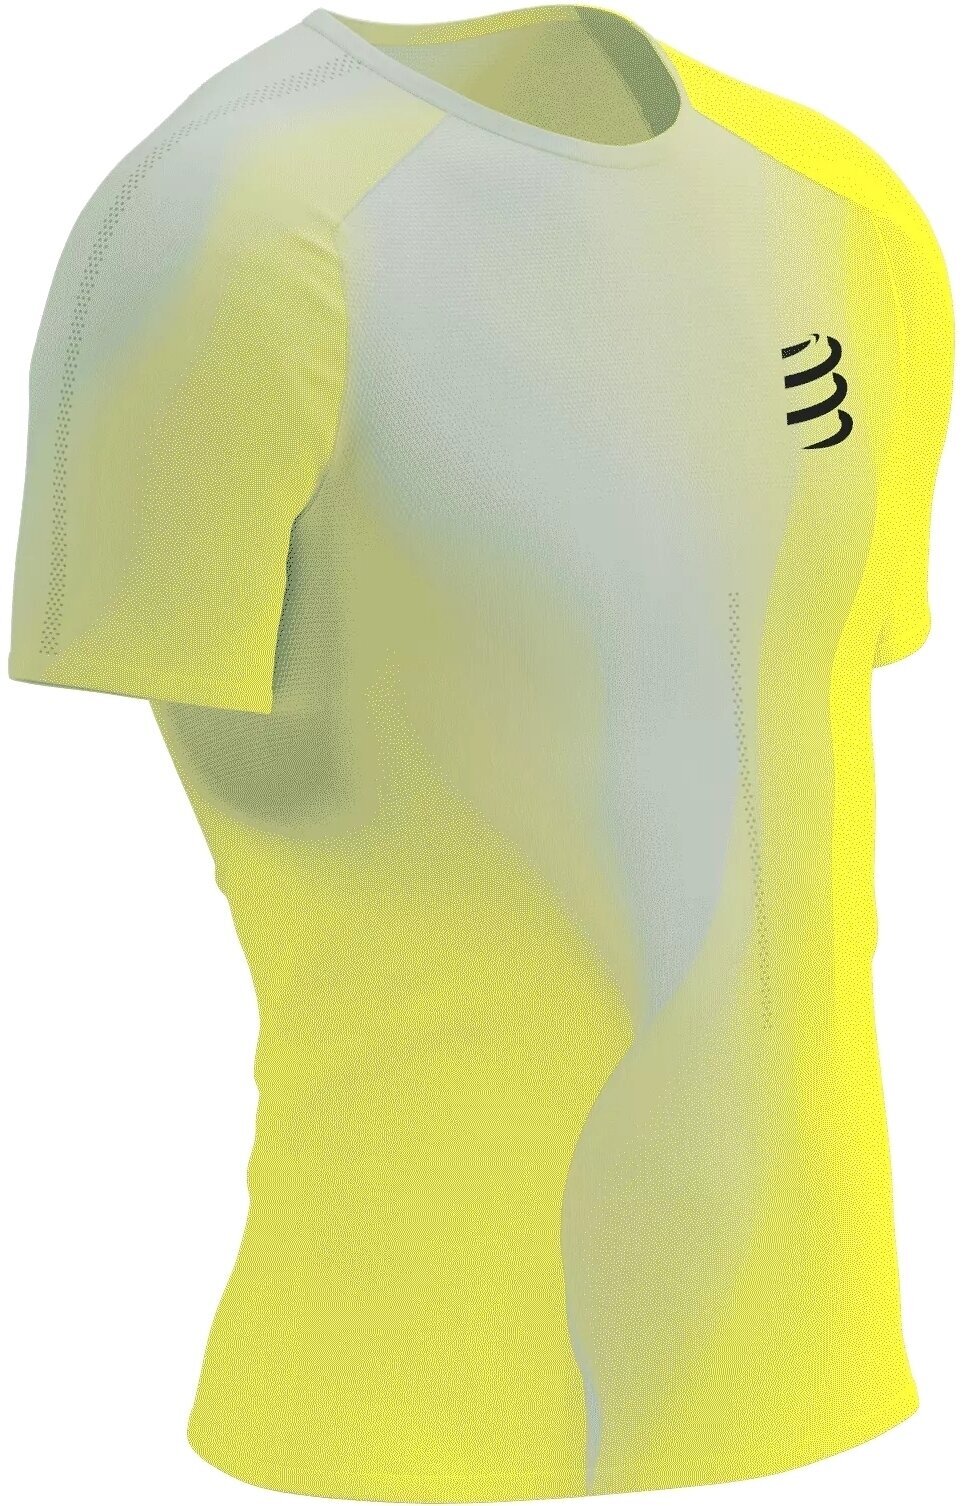 Running t-shirt with short sleeves
 Compressport Performance SS Tshirt M Safety Yellow/White/Black M Running t-shirt with short sleeves